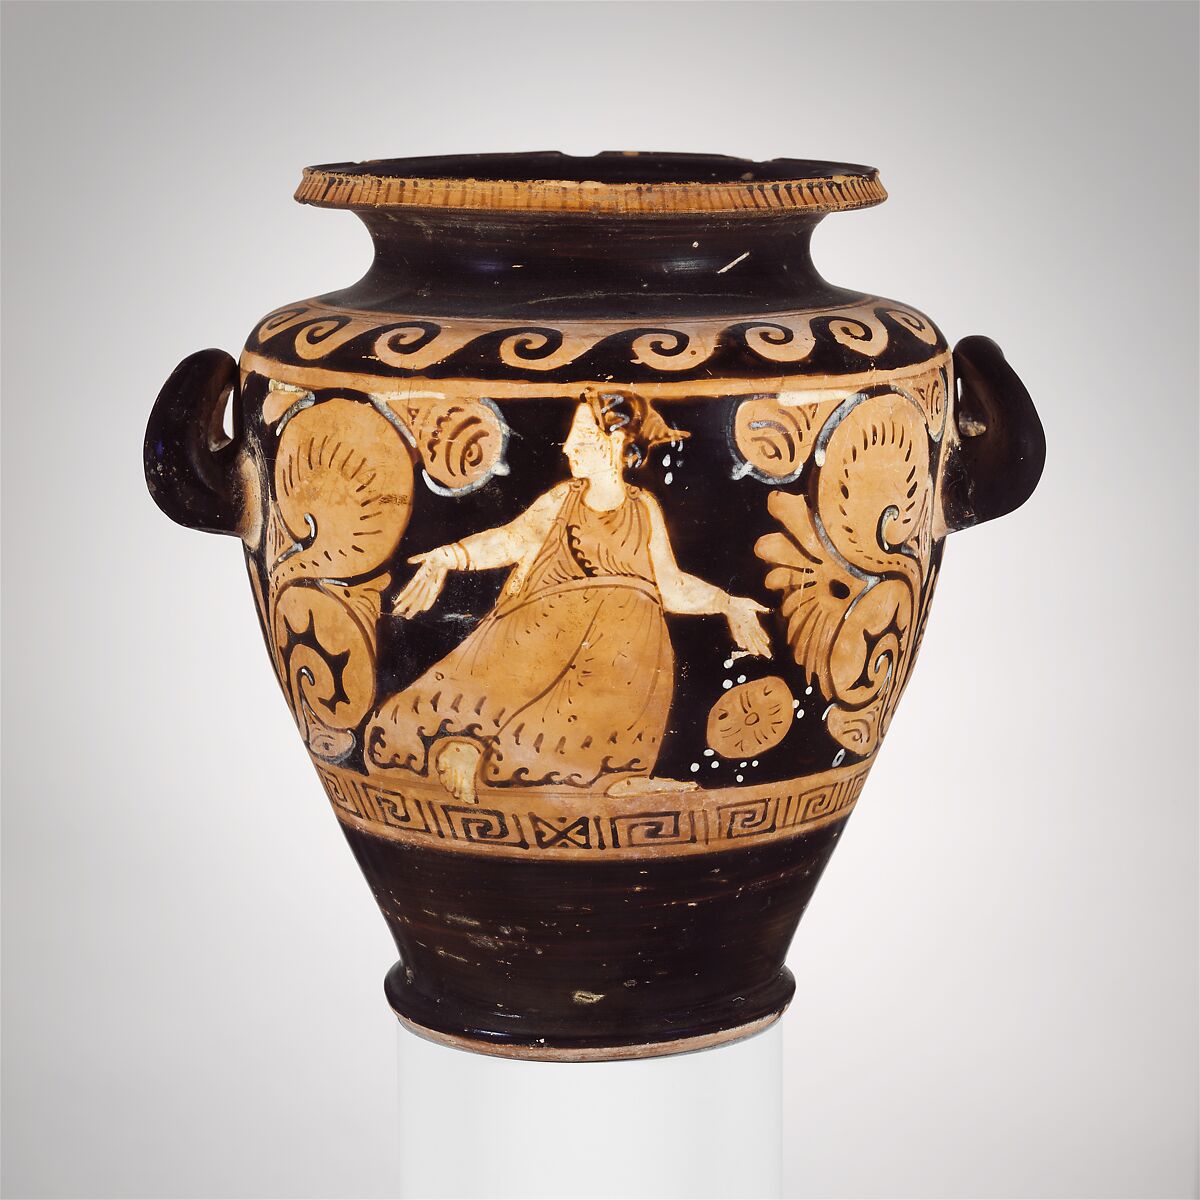 Terracotta stamnos, Attributed to the Fluid Group, Terracotta, Faliscan 